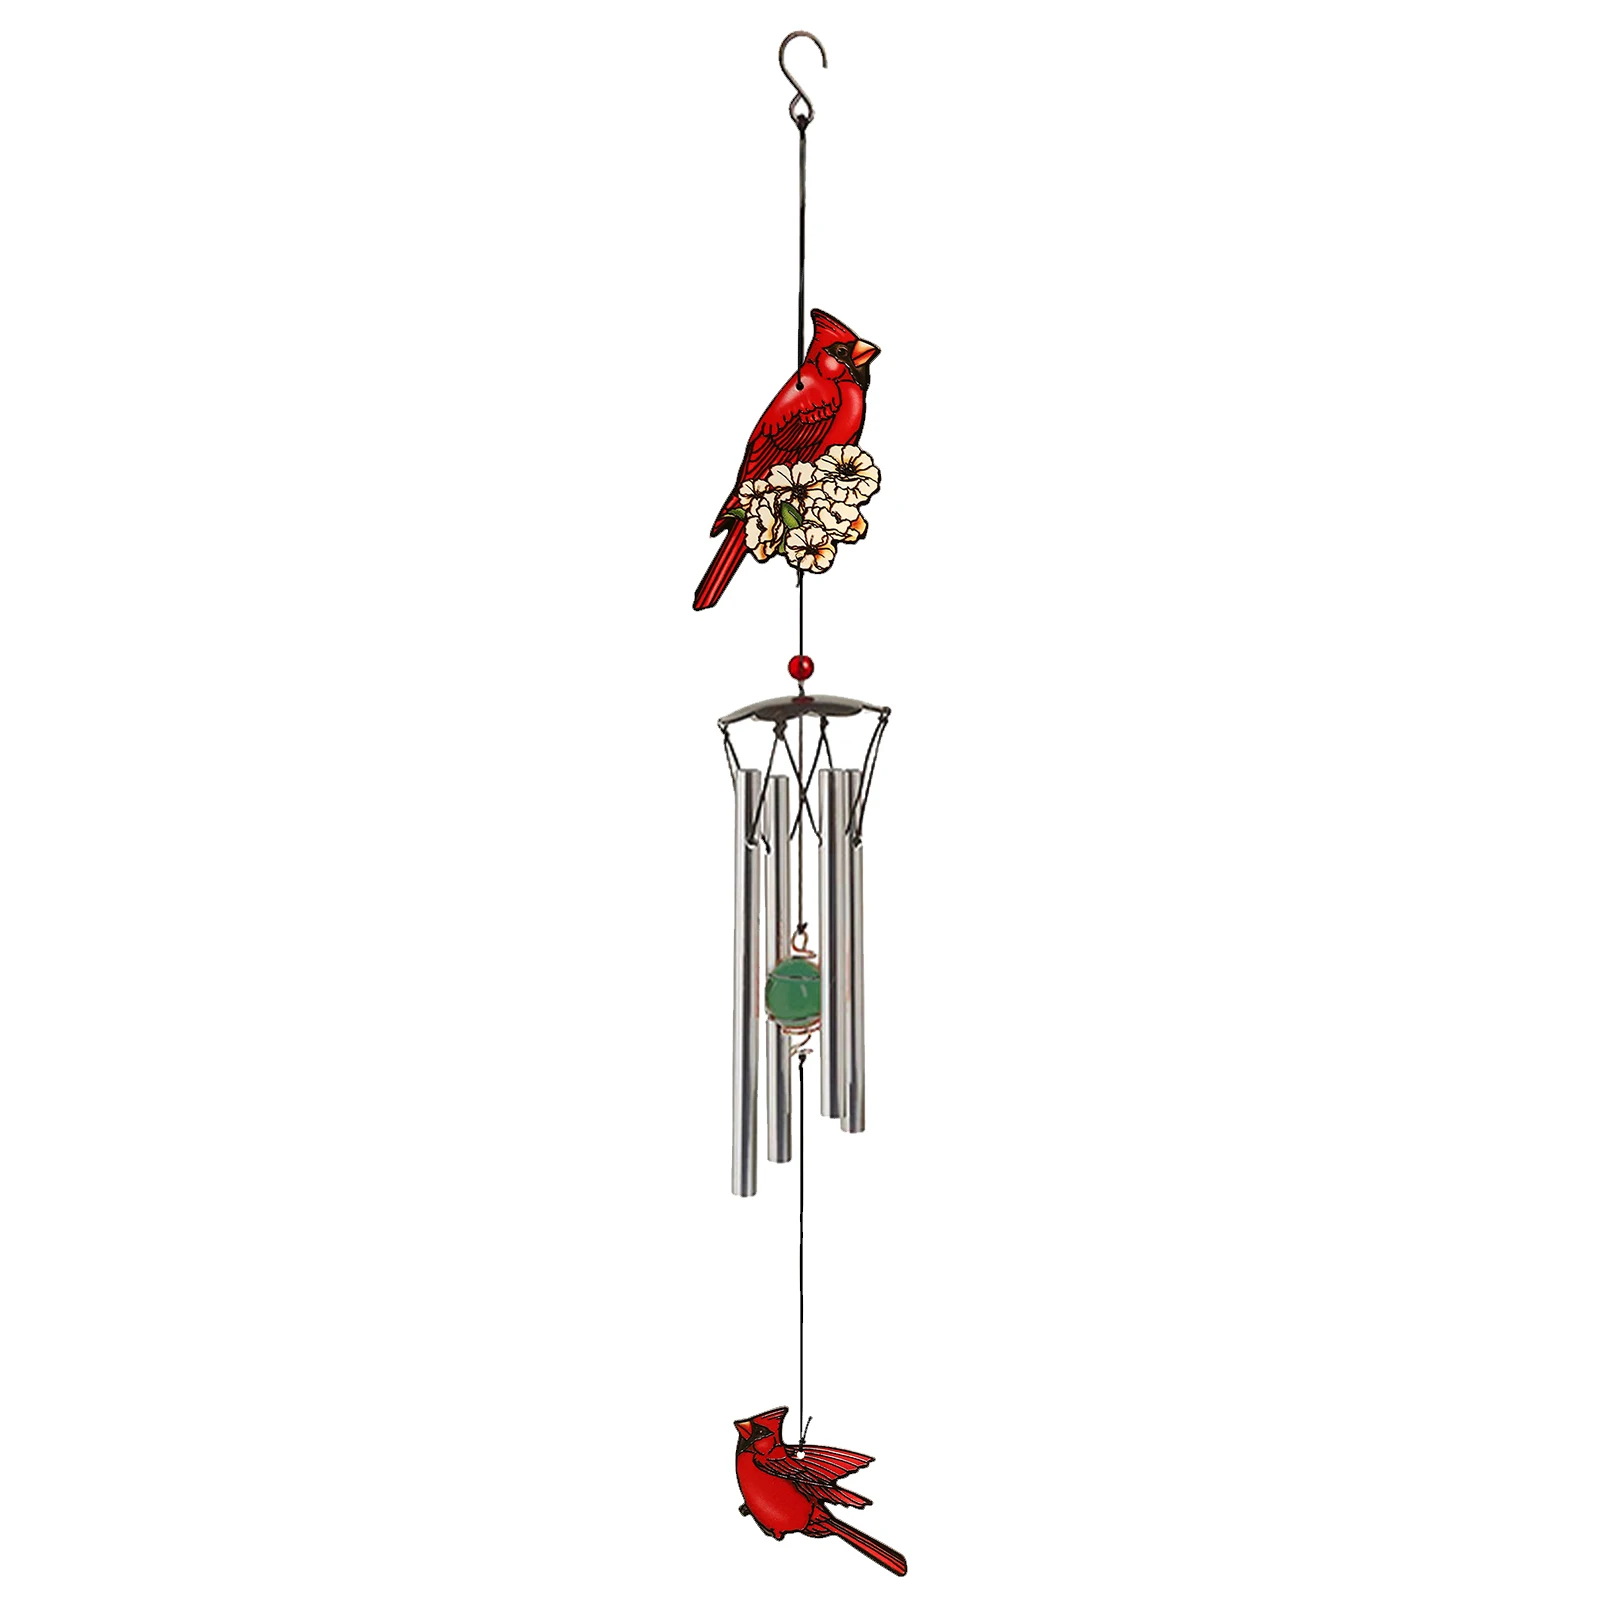 Clear Sound Backyard Patio Cardinal Bird Weather Resistant Church Birthday Gift Garden Ornaments Wind Chime Outdoor Decorations